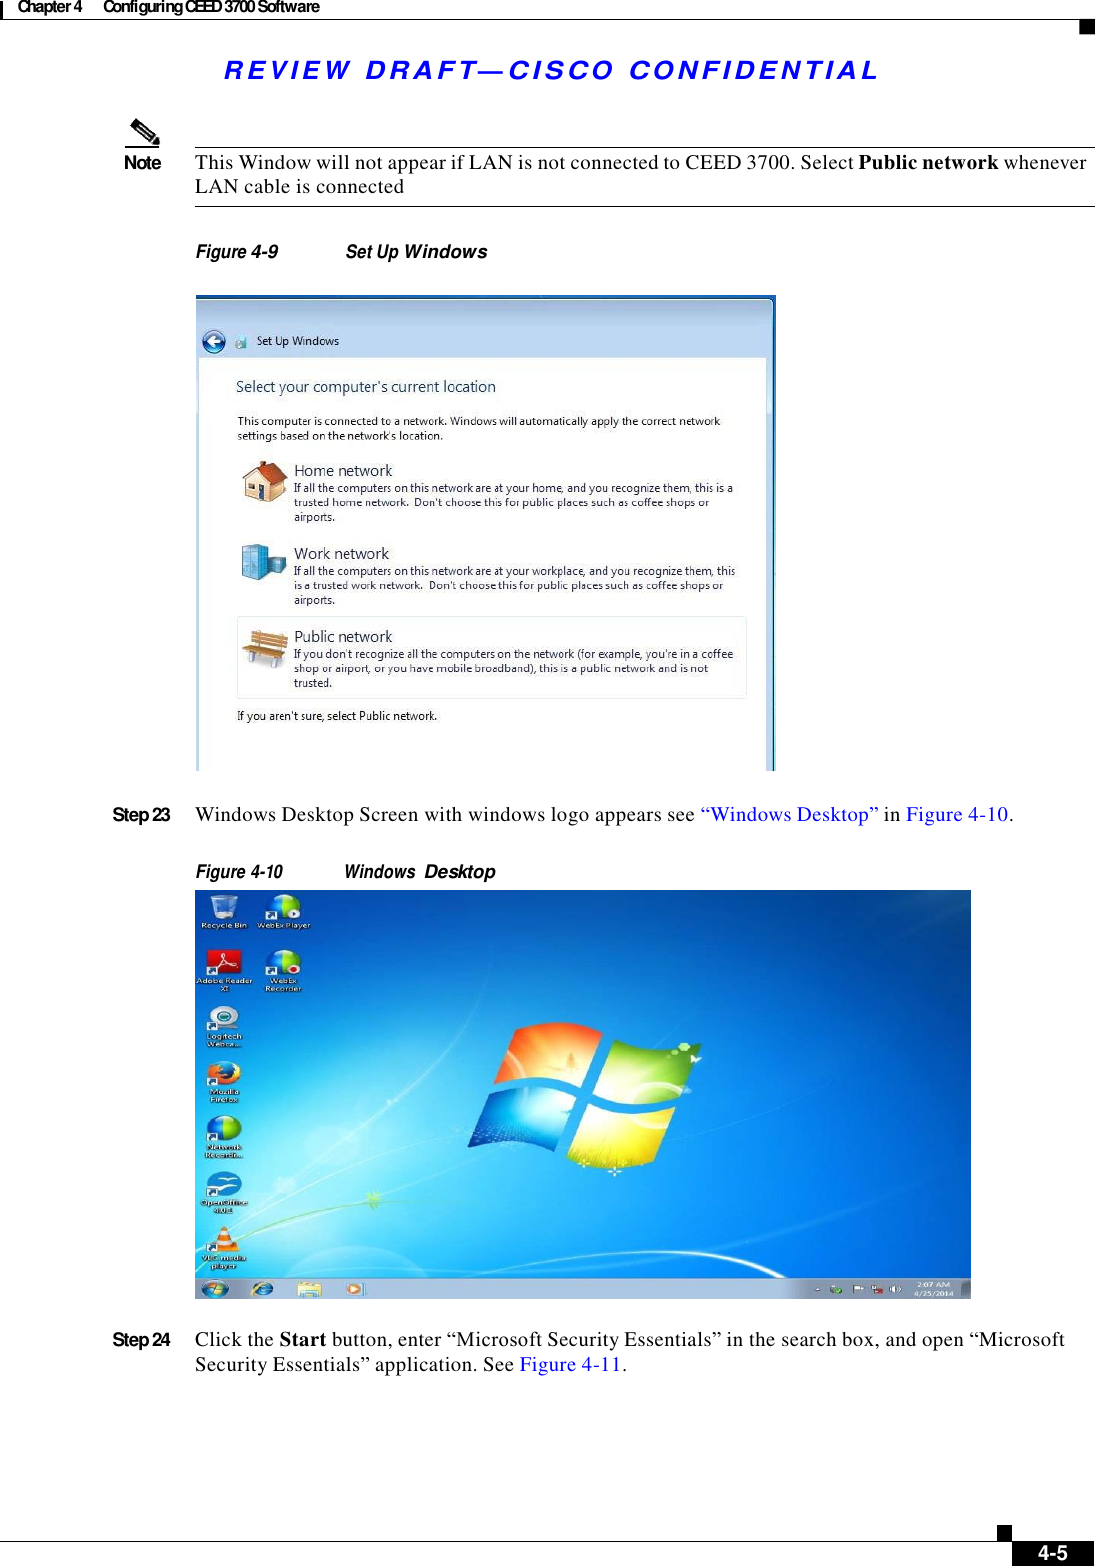 Chapter 4  Configuring CEED 3700 Software   R E V I E W  DR AFT — CISC O  C O NF IDE N TIAL     Note  This Window will not appear if LAN is not connected to CEED 3700. Select Public network whenever LAN cable is connected   Figure 4-9 Set Up Windows      Step 23  Windows Desktop Screen with windows logo appears see “Windows Desktop” in Figure 4-10.   Figure 4-10 Windows Desktop   Step 24  Click the Start button, enter “Microsoft Security Essentials” in the search box, and open “Microsoft Security Essentials” application. See Figure 4-11.            4-5 